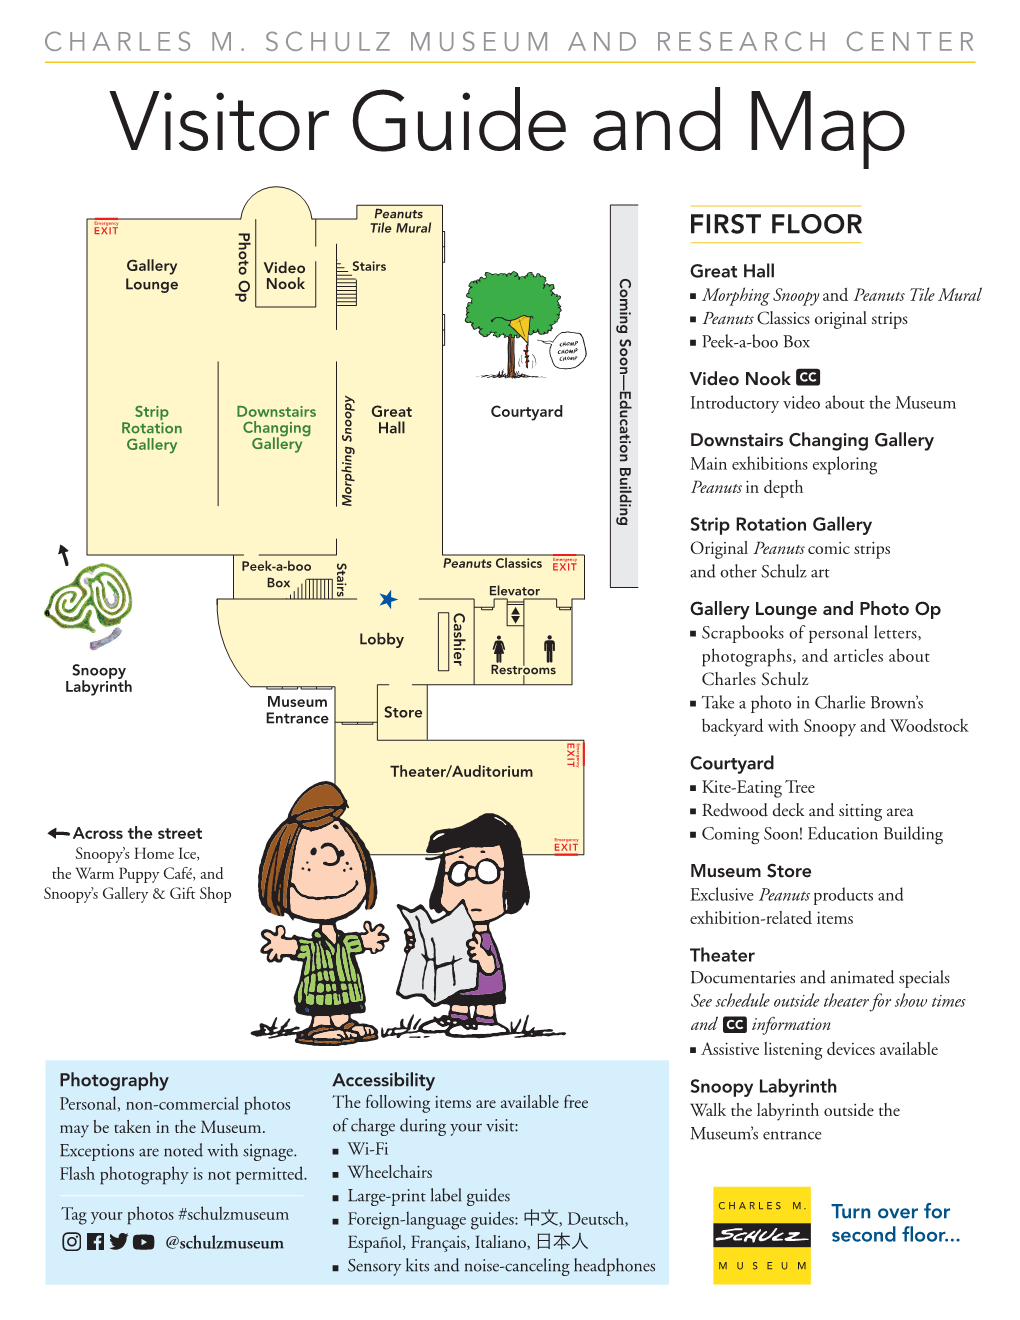 CHARLES M. SCHULZ MUSEUM and RESEARCH CENTER Visitor Guide and Map